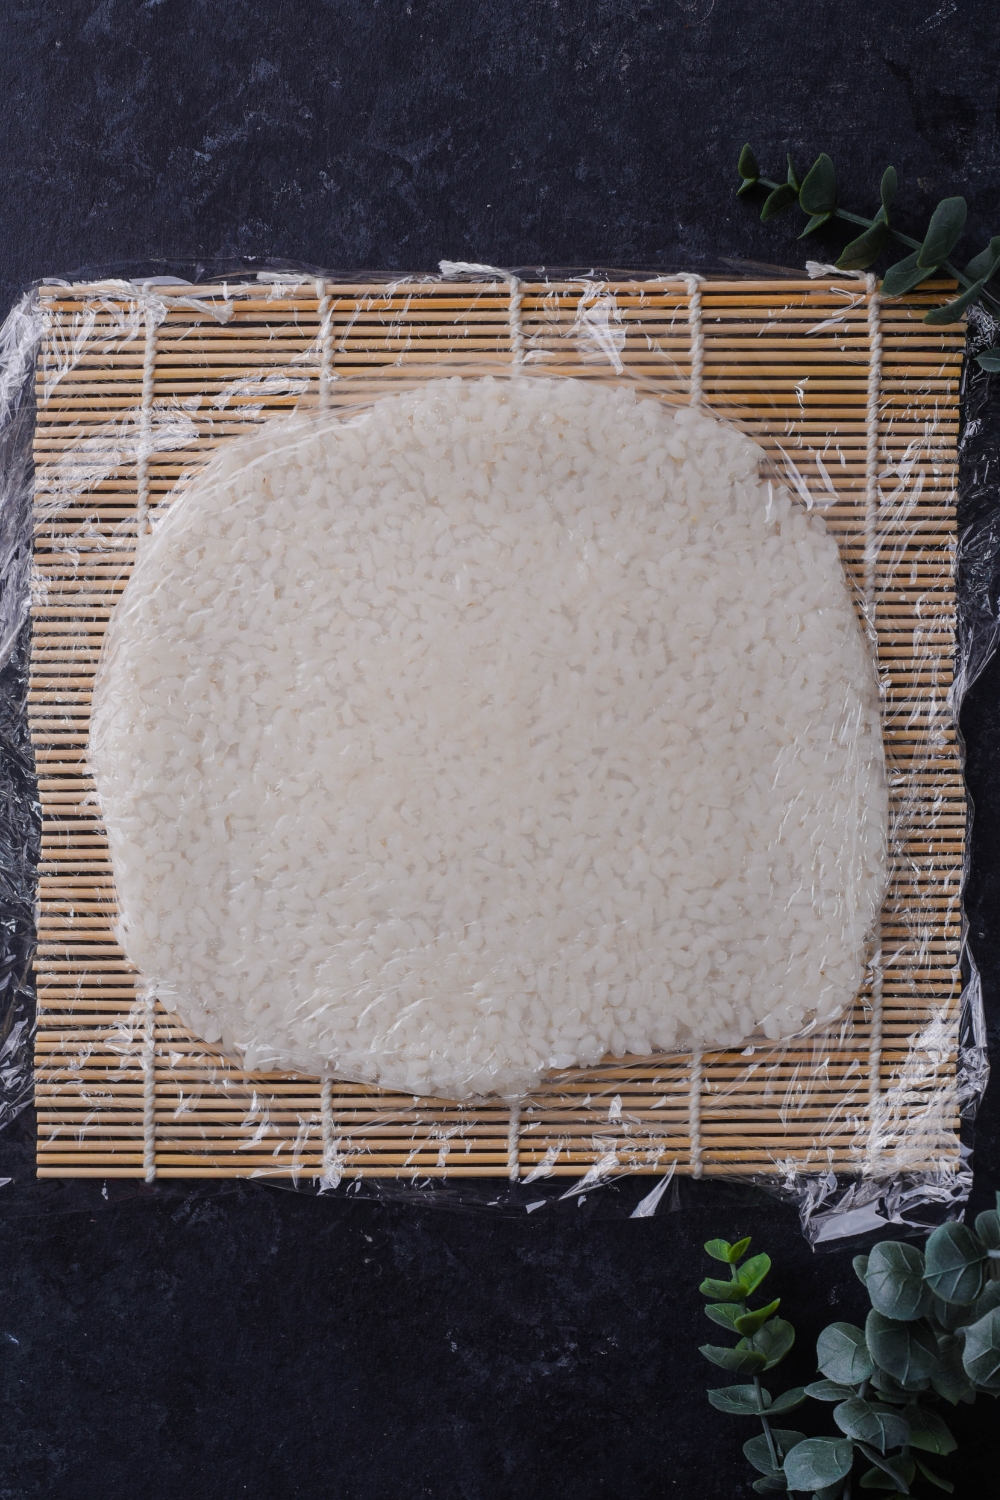 An overhead view of layer of sushi rice on a bamboo mat.